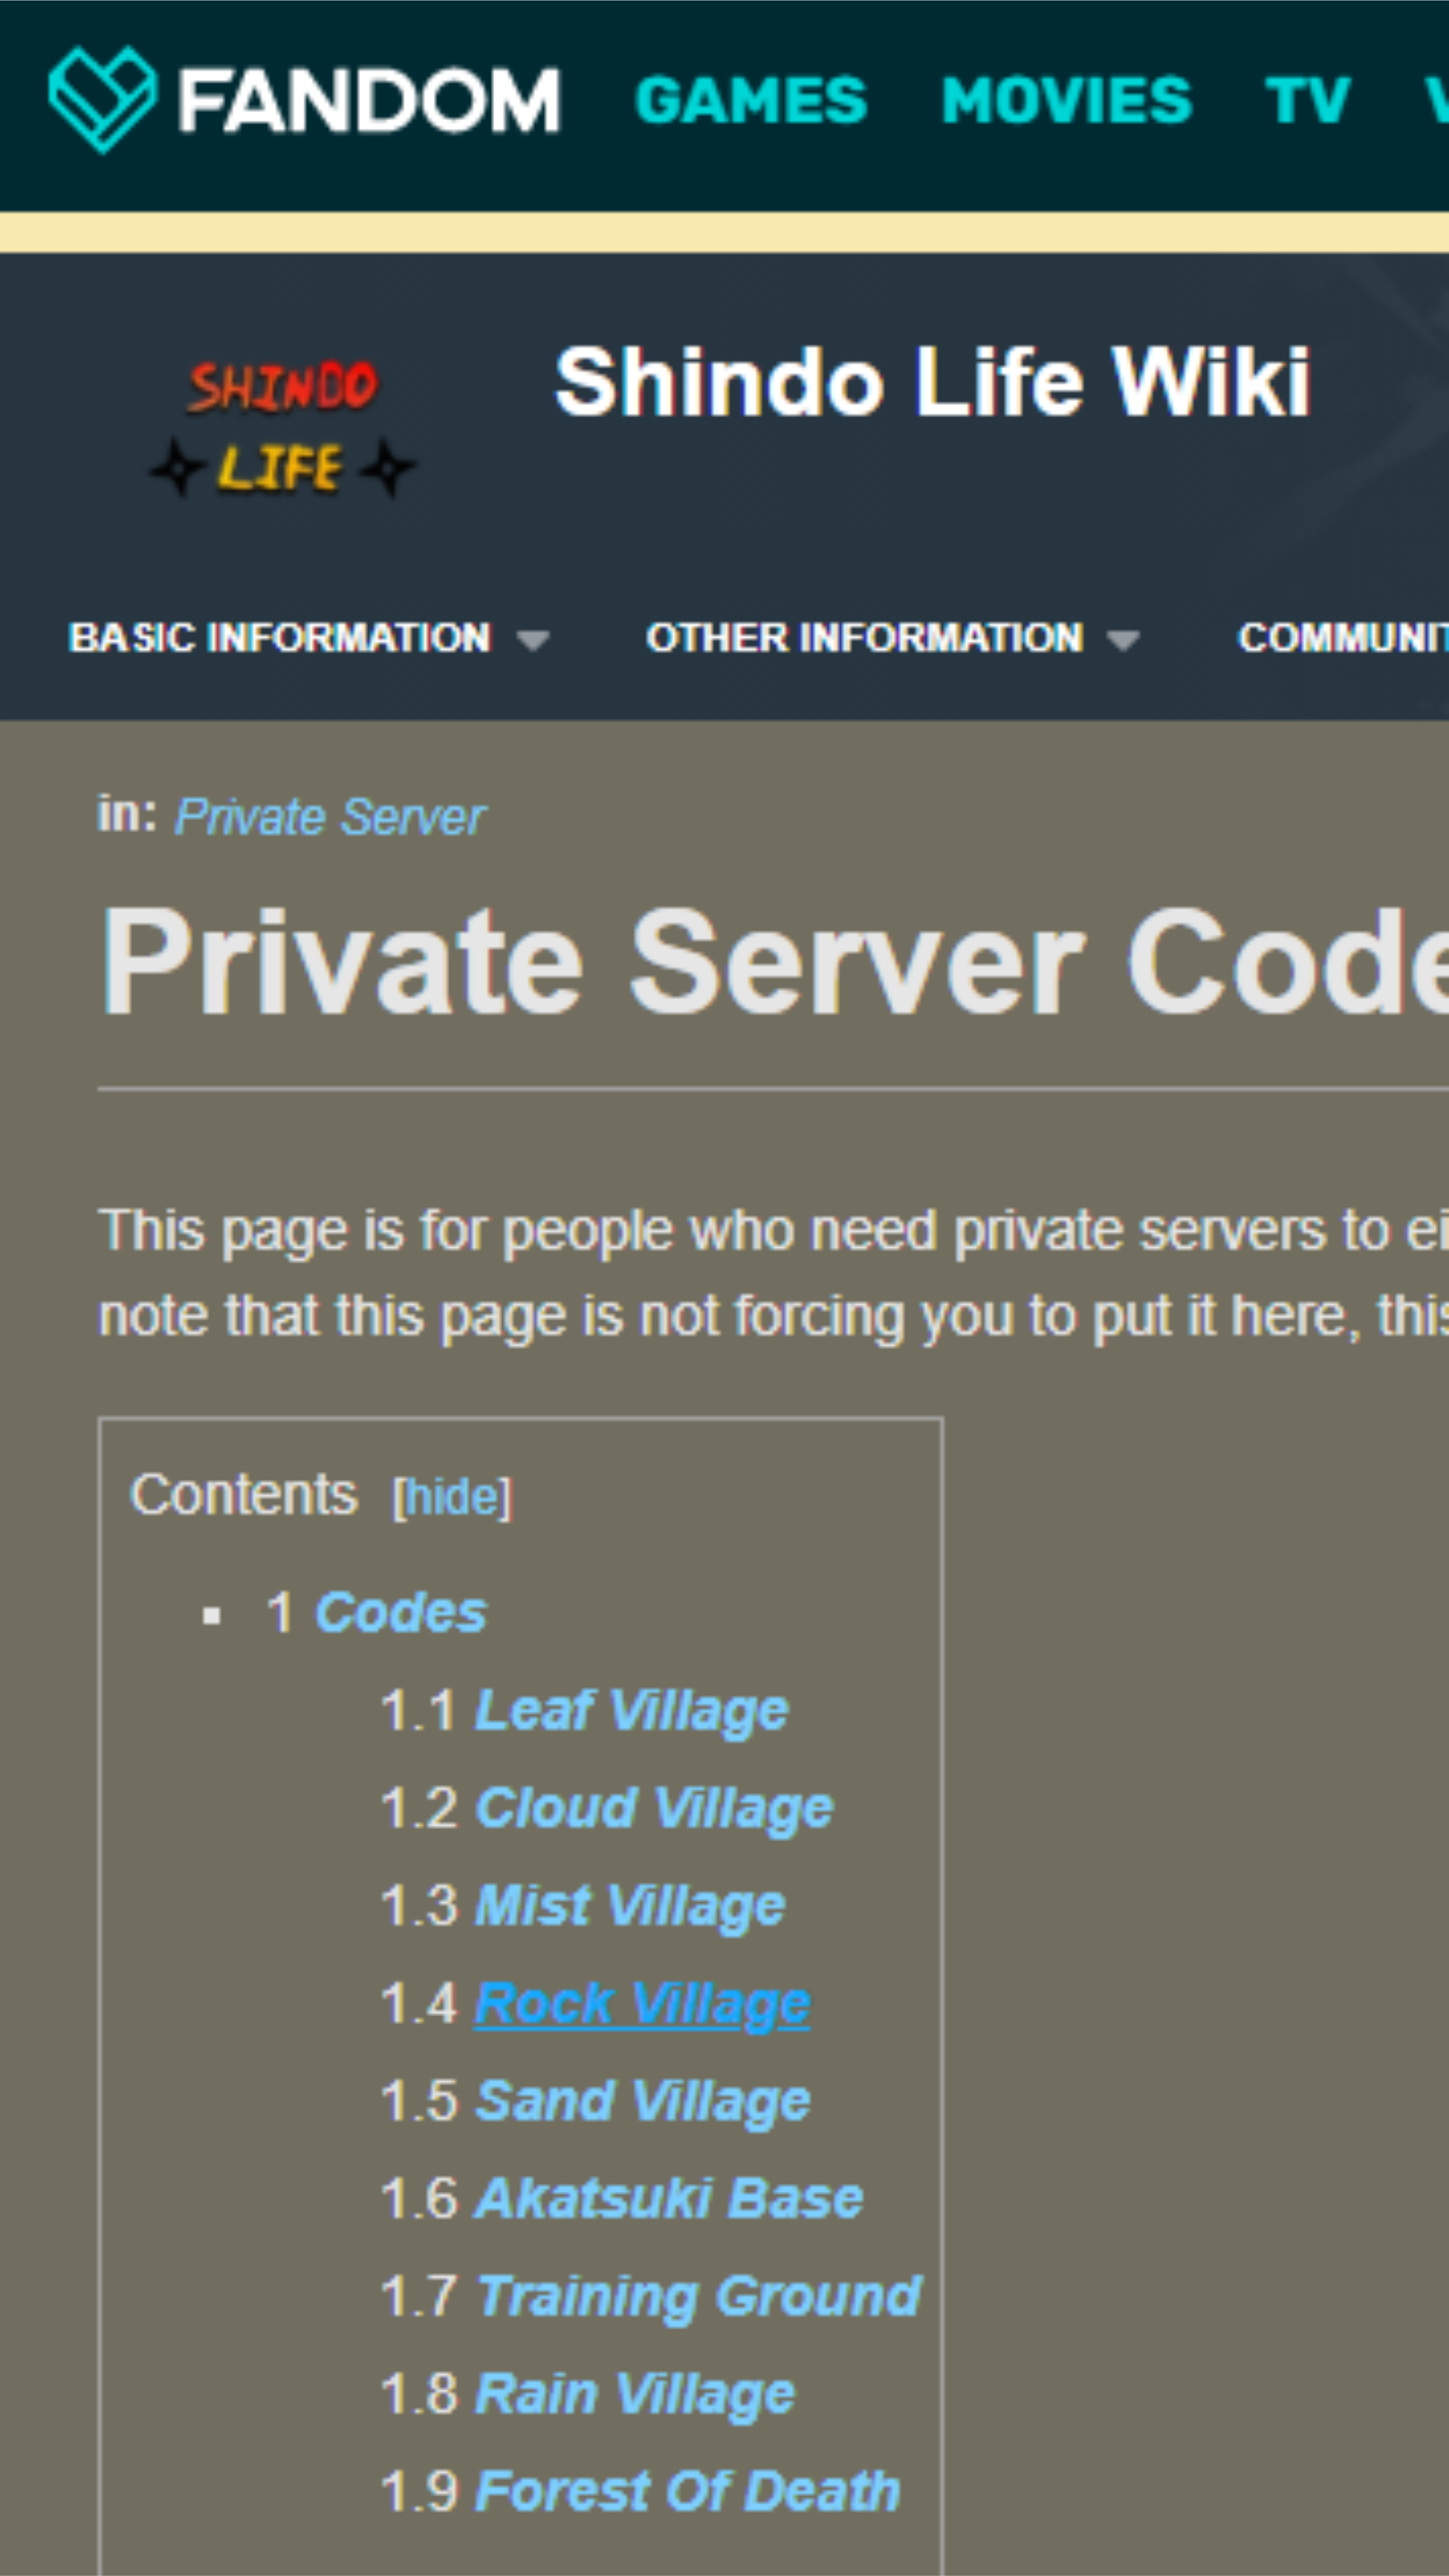 How To Join A Private Server In Shindo Life - roblox shutting down vip severs